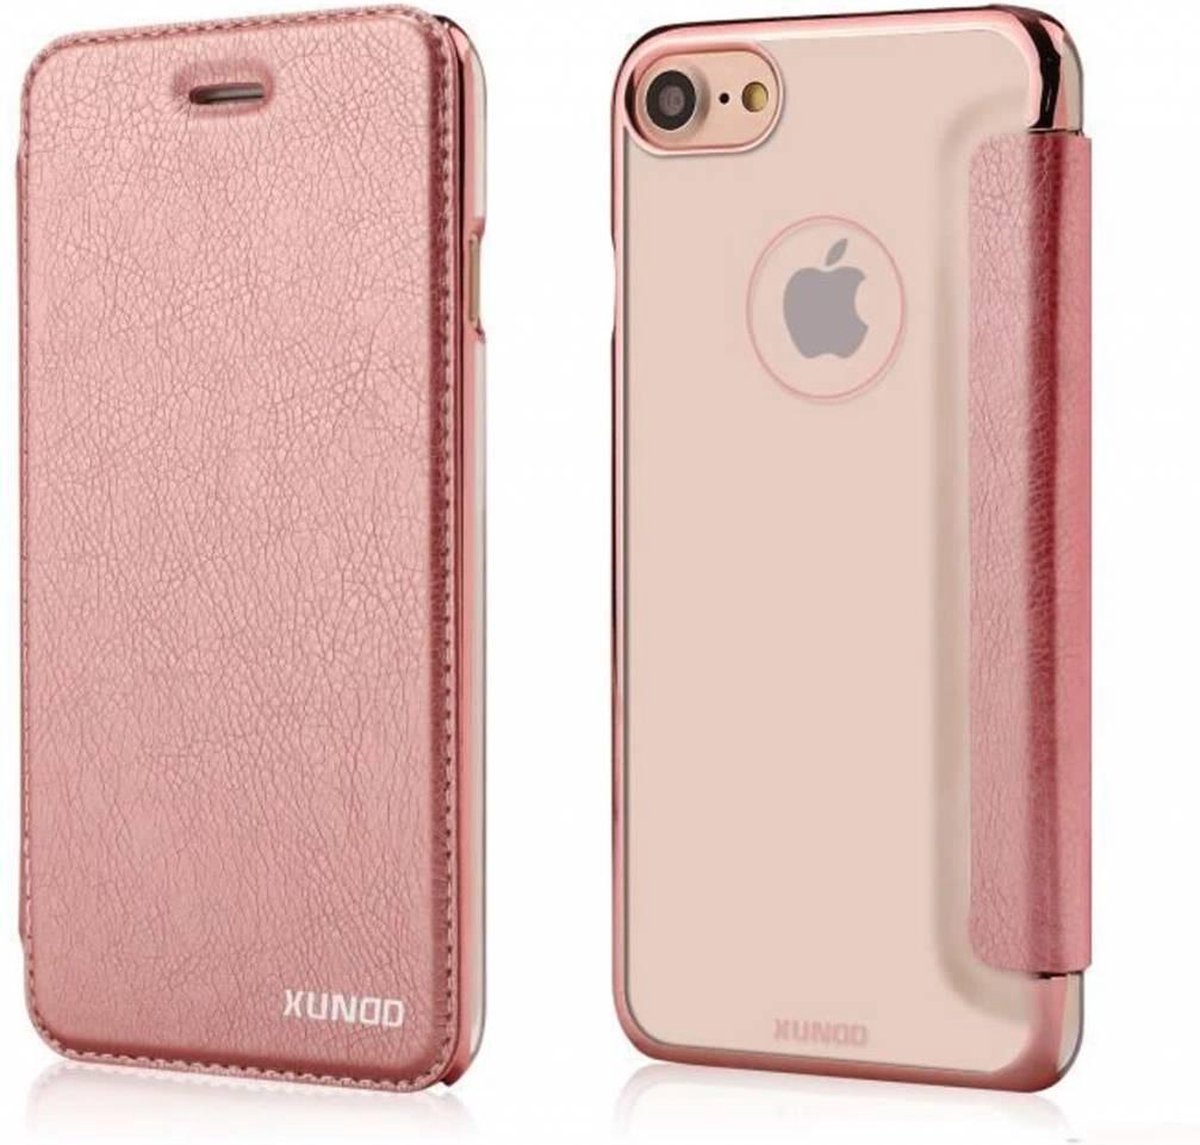 Xundd iPhone 7 / iPhone 8 (4.7 inch) Folio Flip PU Leather hoesje + Pasje met transparant hard back cover Rose Goud